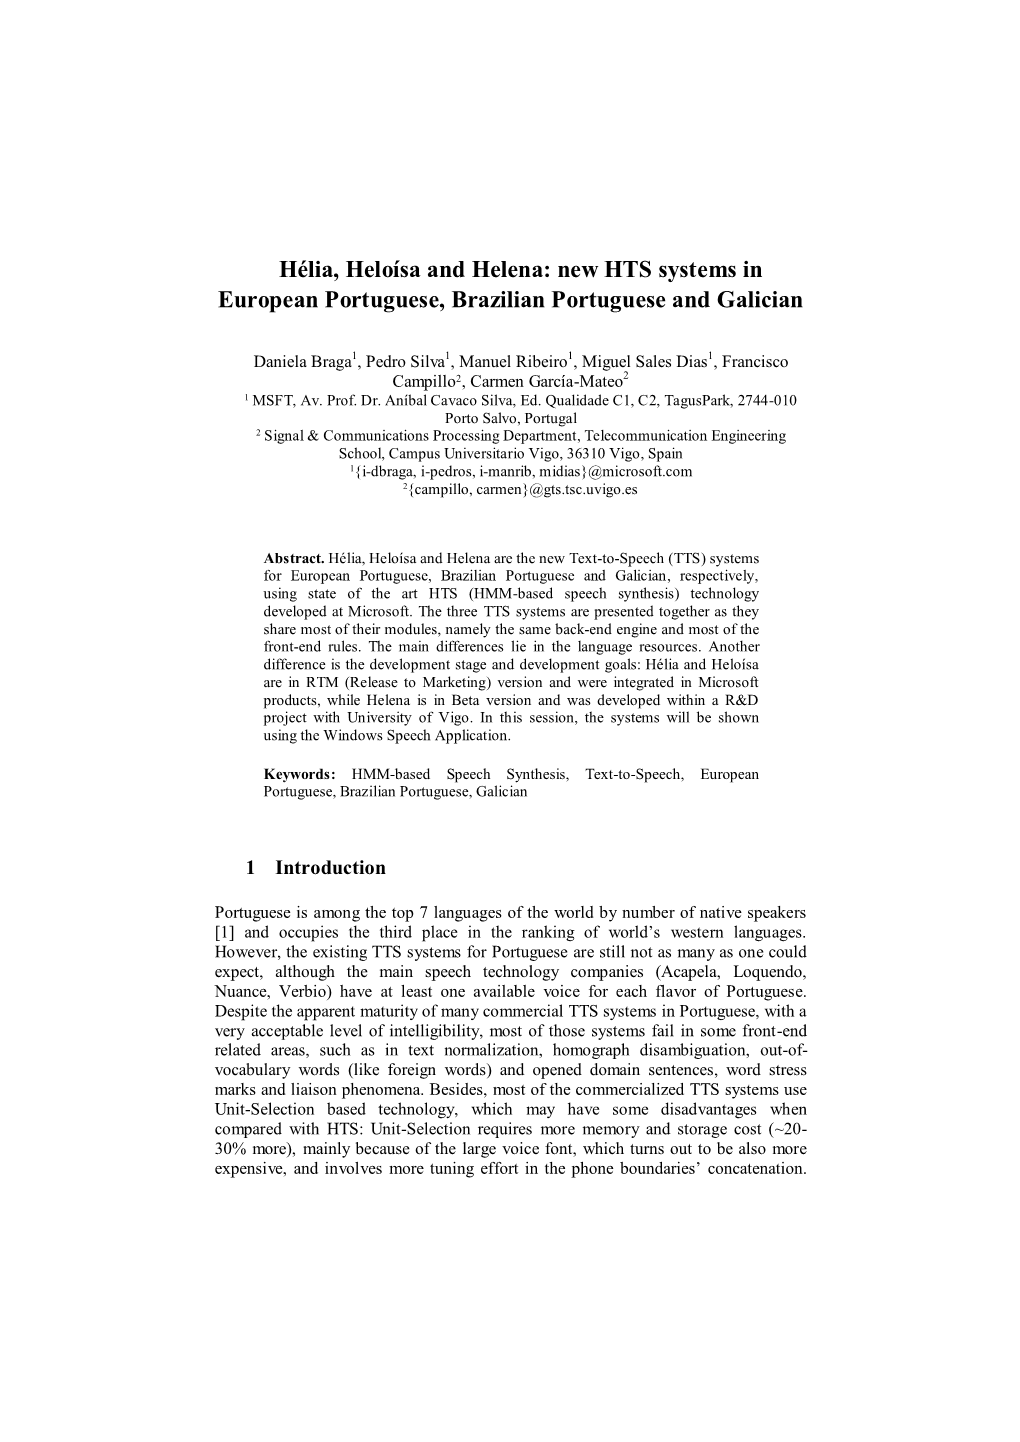 Hélia, Heloísa and Helena: New HTS Systems in European Portuguese, Brazilian Portuguese and Galician